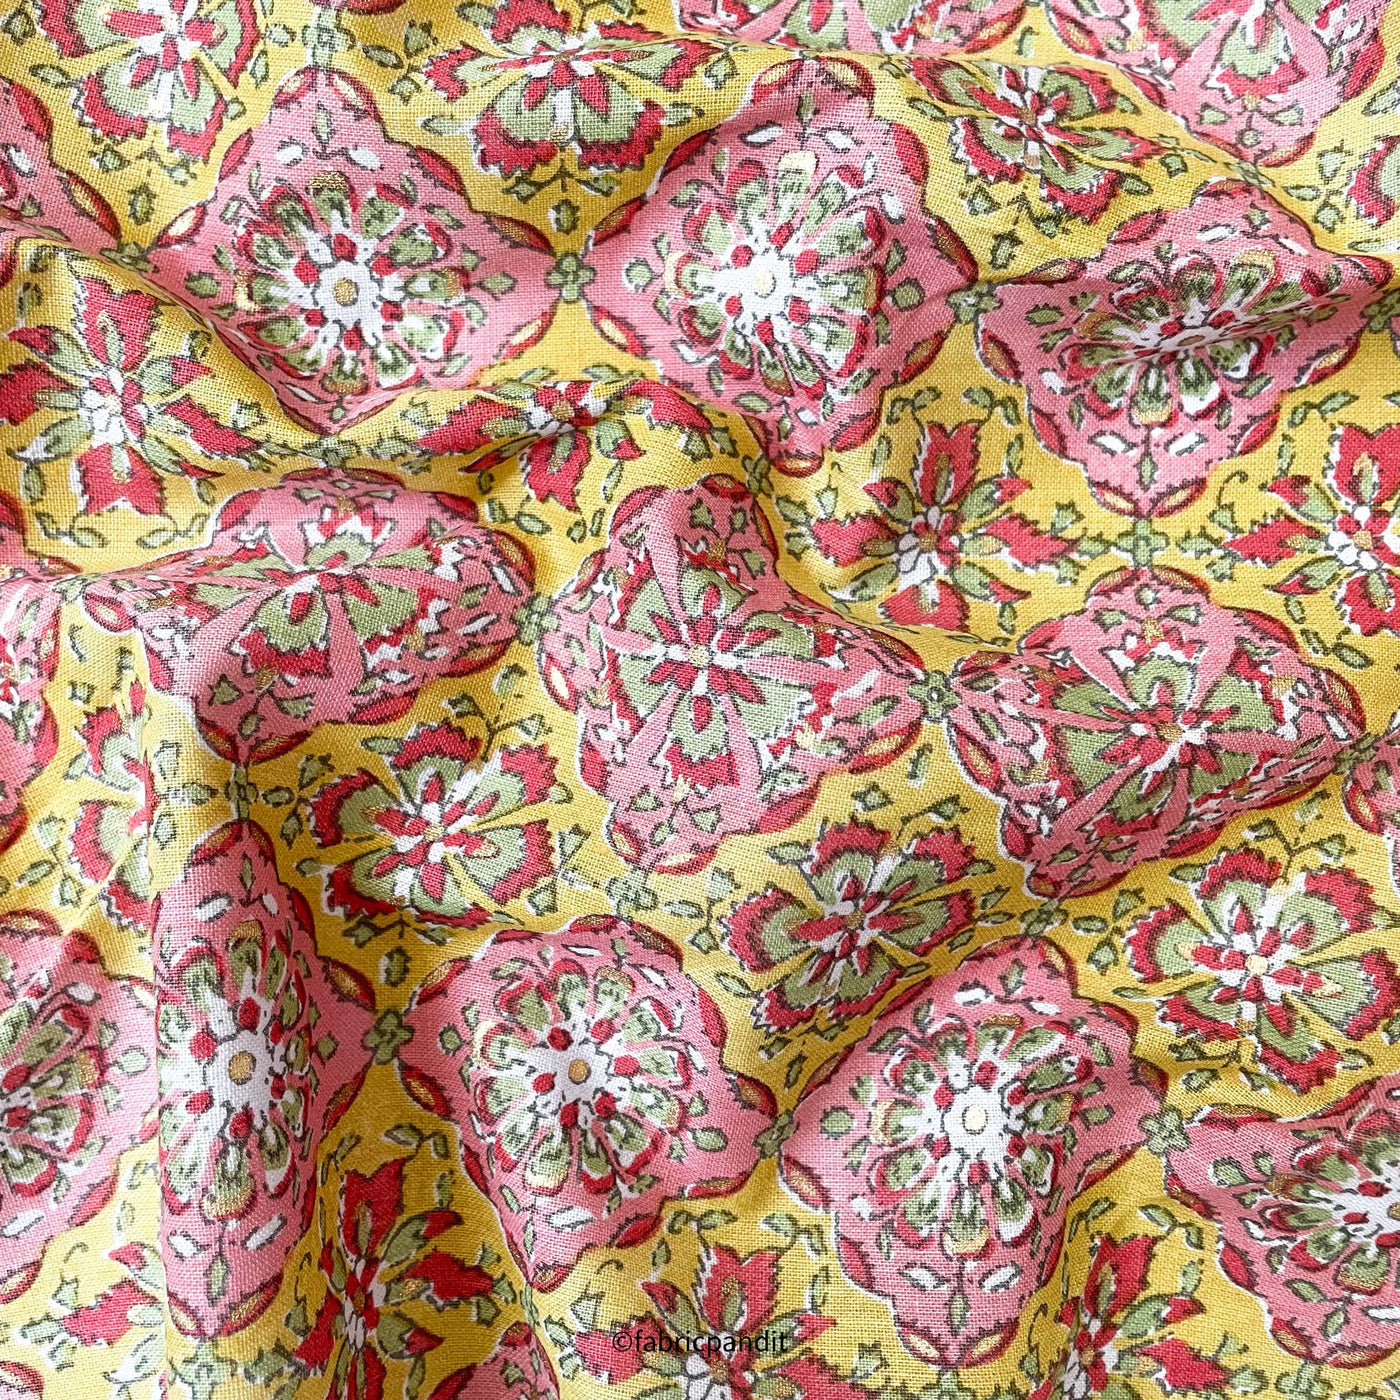 Hand Block Printed Cotton Fabric Cut Piece (CUT PIECE) Mustard Yellow & Rose Pink Geometric Floral Hand Block Printed With Foil Pure Cotton Fabric (Width 42 inches)